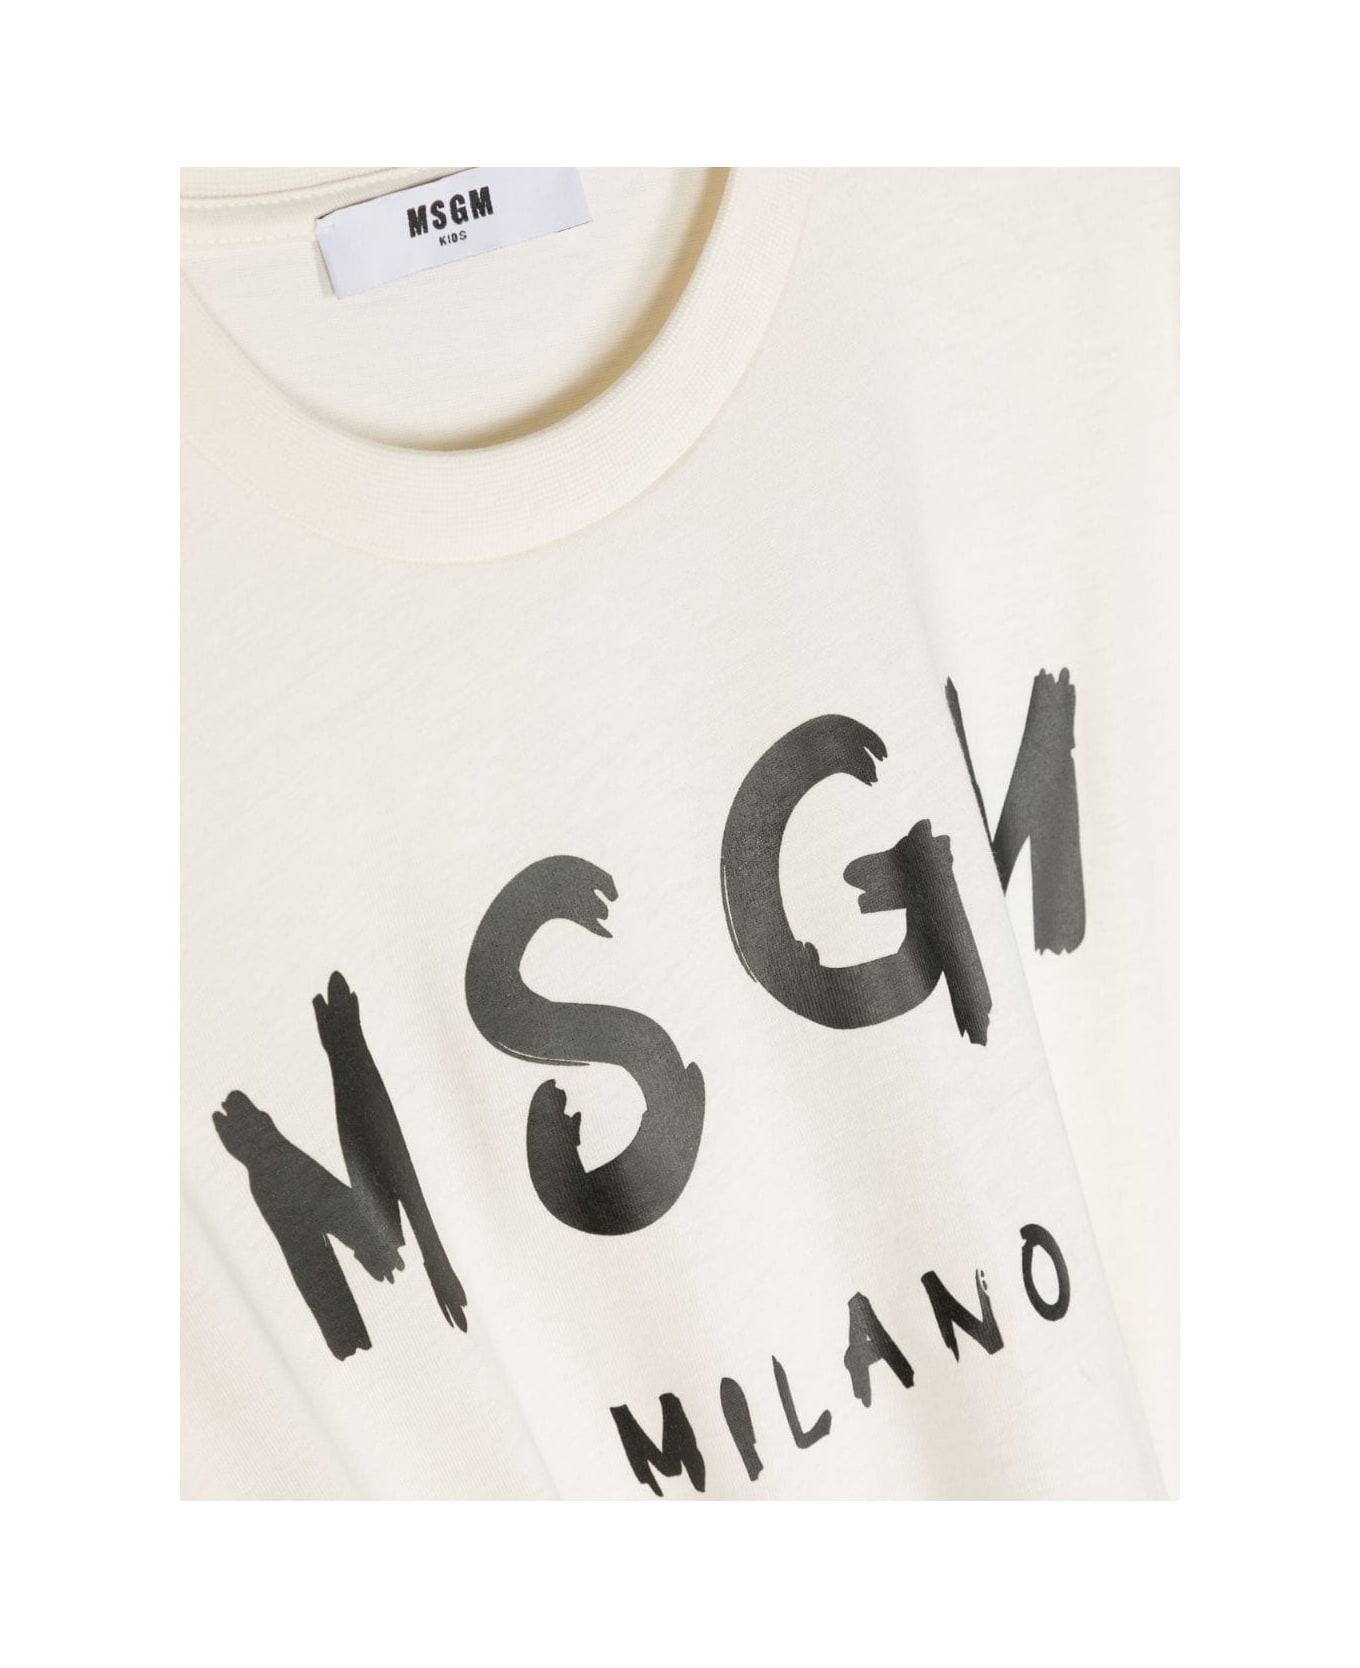 MSGM Cream T-shirt With Brushed Logo - Crema Tシャツ＆ポロシャツ